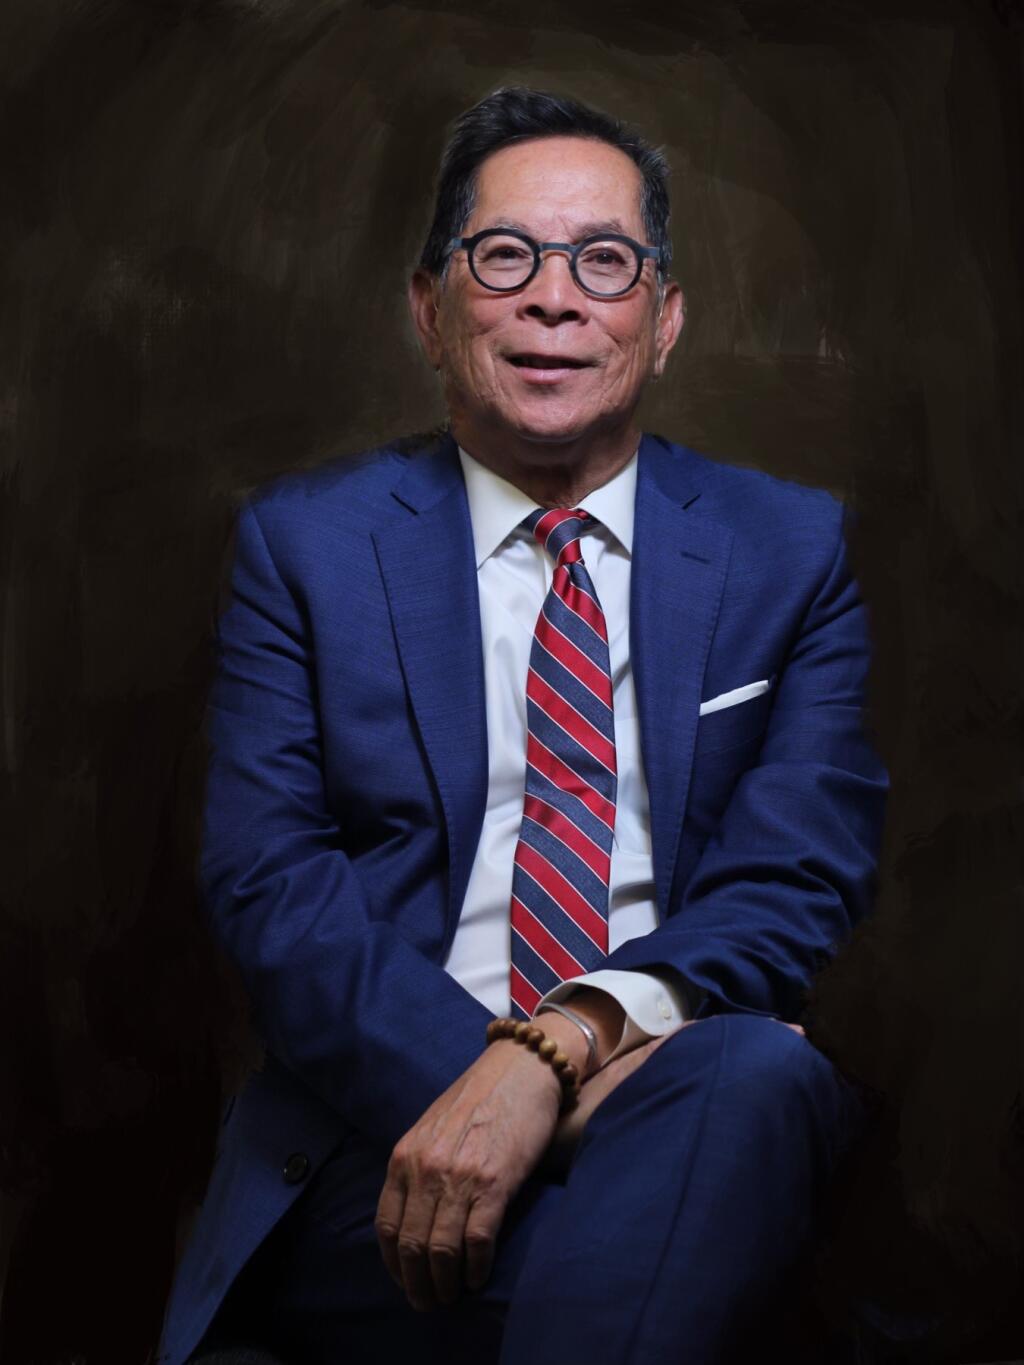 Frank Chong is on the Summit State Bank board of directors. (Courtesy of Summit State Bank)